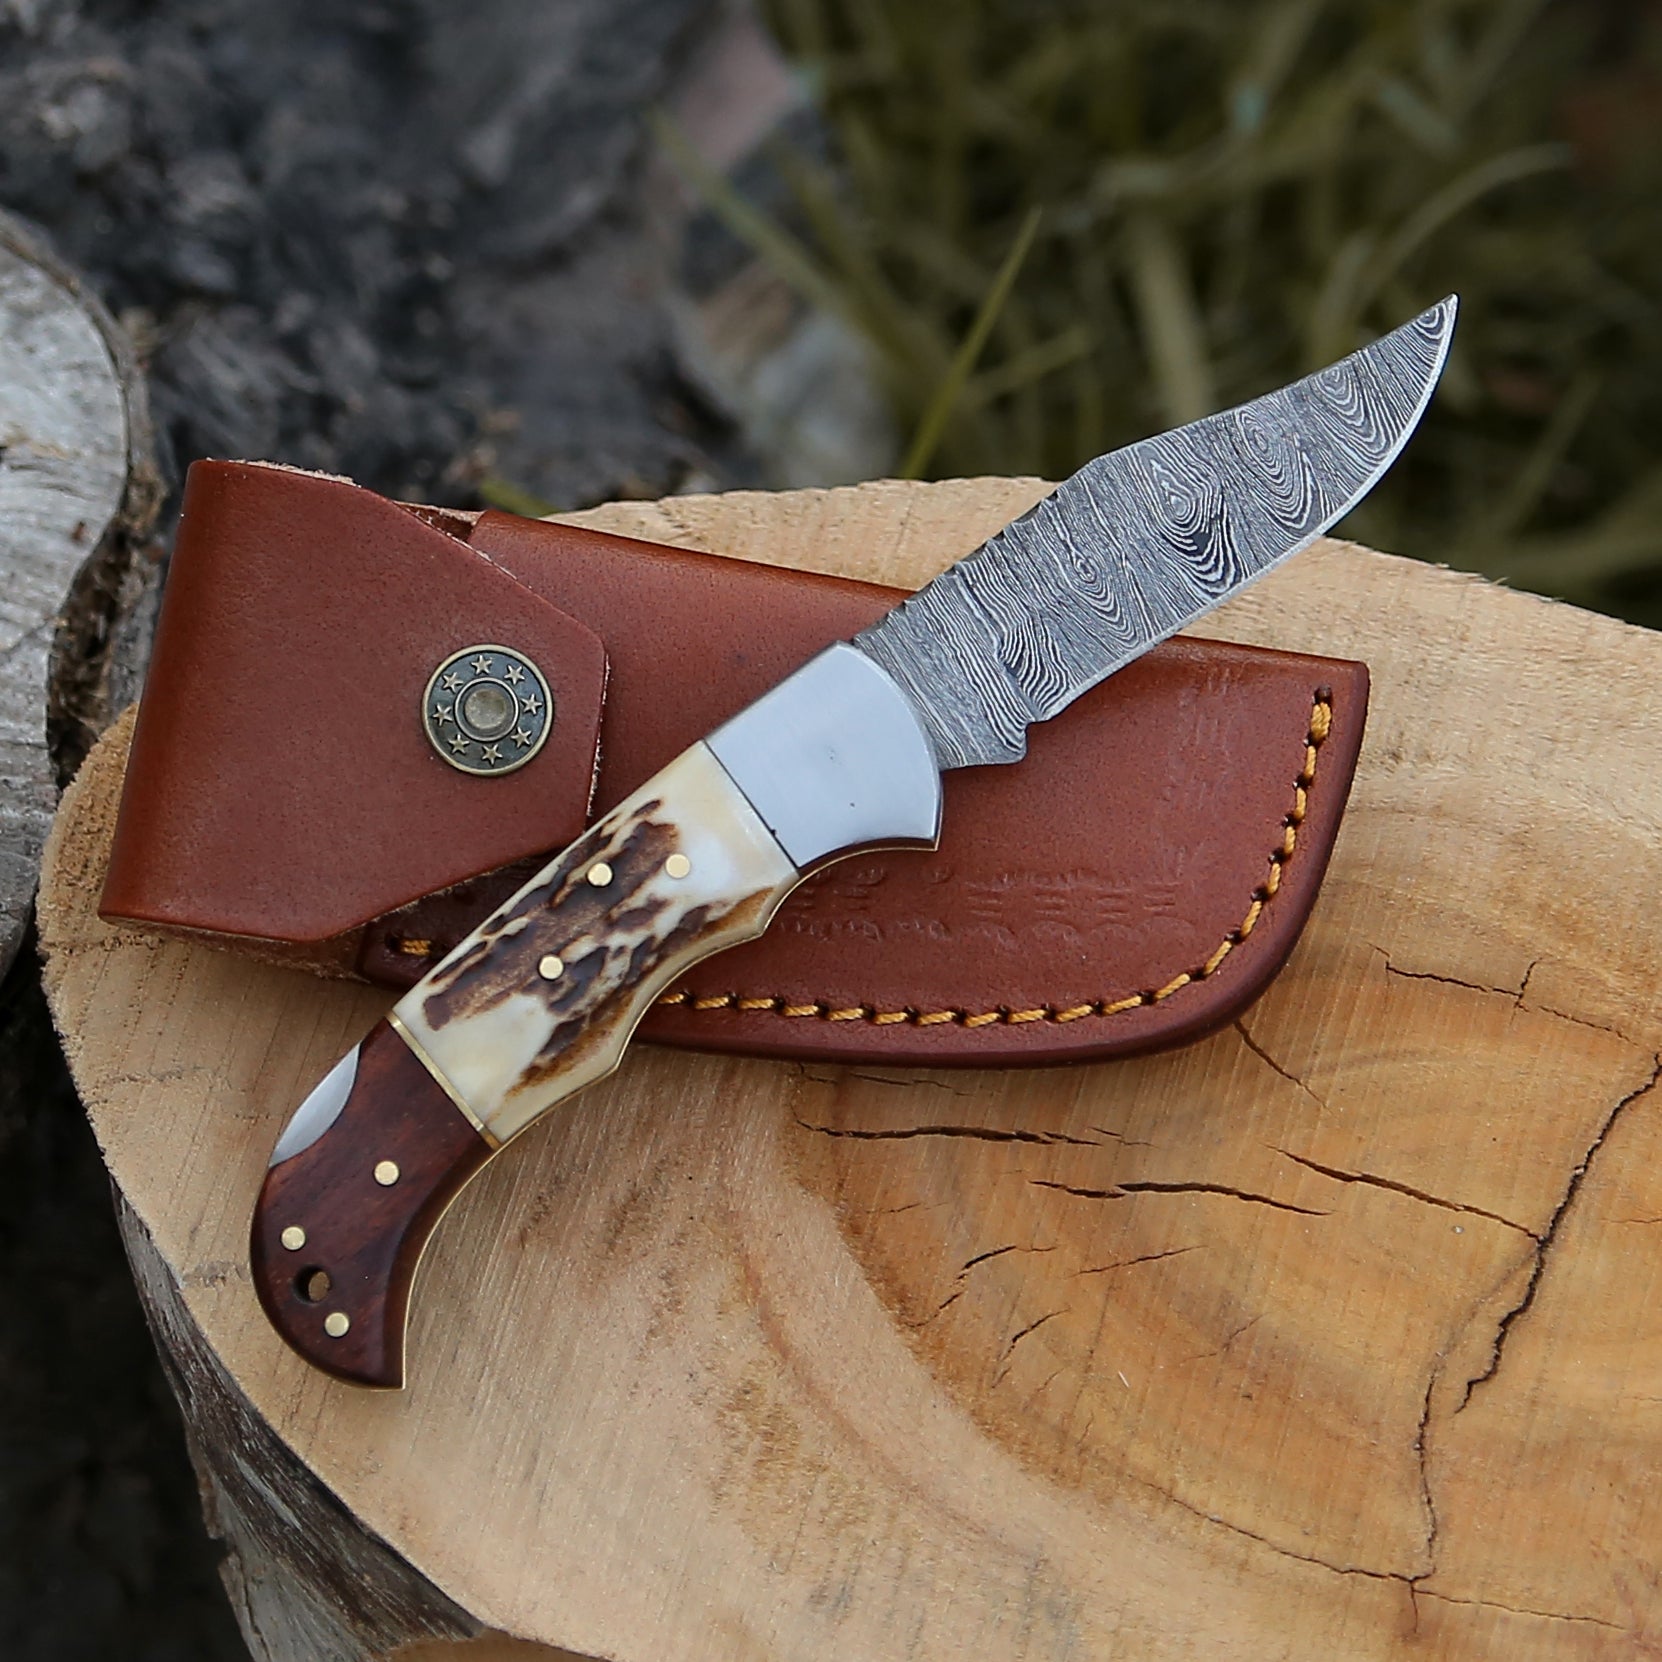 Stag 6.5" Handmade Damascus Steel Folding Knife Back Lock Pocket Knife With Leather Pouch Personalized Gift for Men.